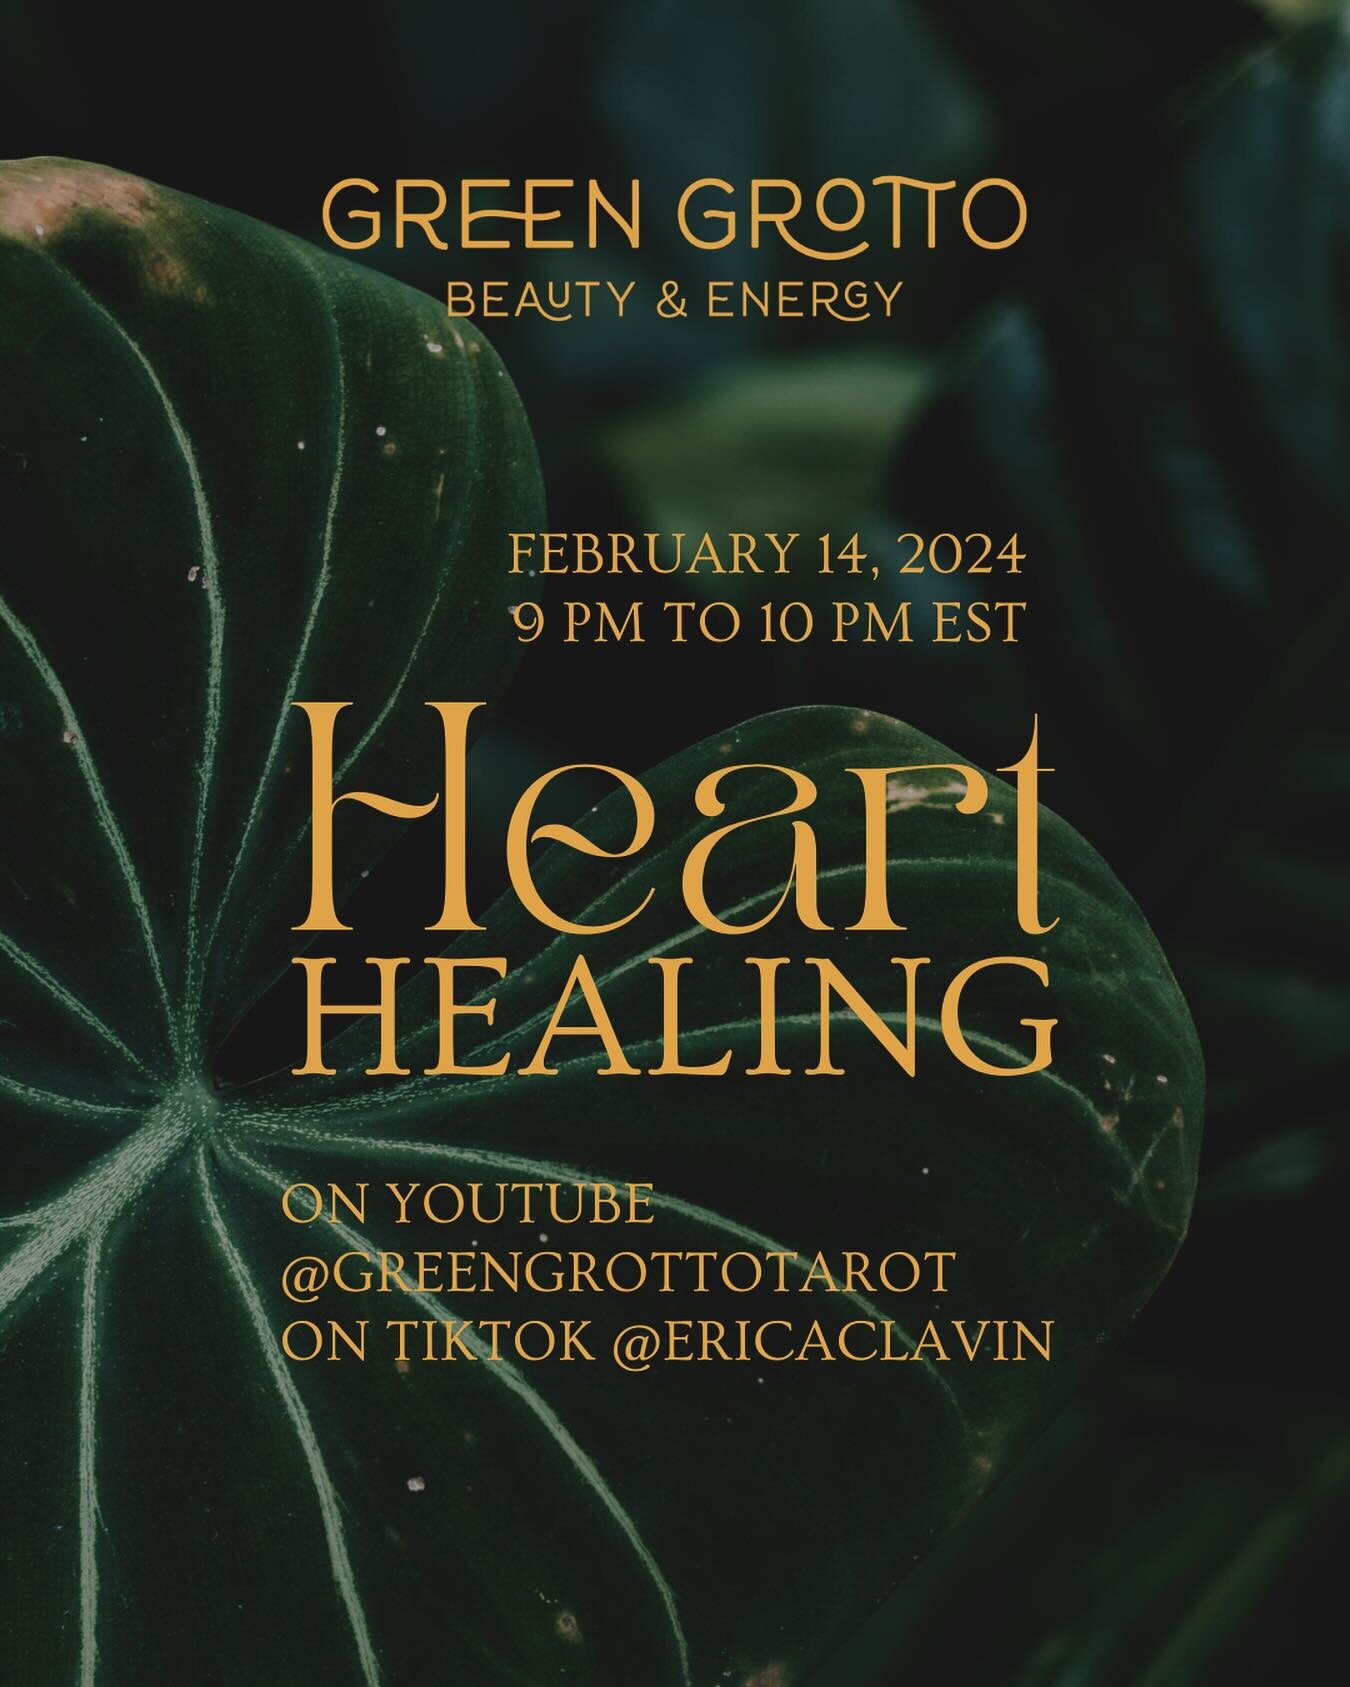 Join me live on YouTube or TikTok for a community healing experience this Valentine&rsquo;s Day. There will be a little something for everyone to release the past &amp; enter a loving state of being. Featuring guided meditations that utilize The Viol